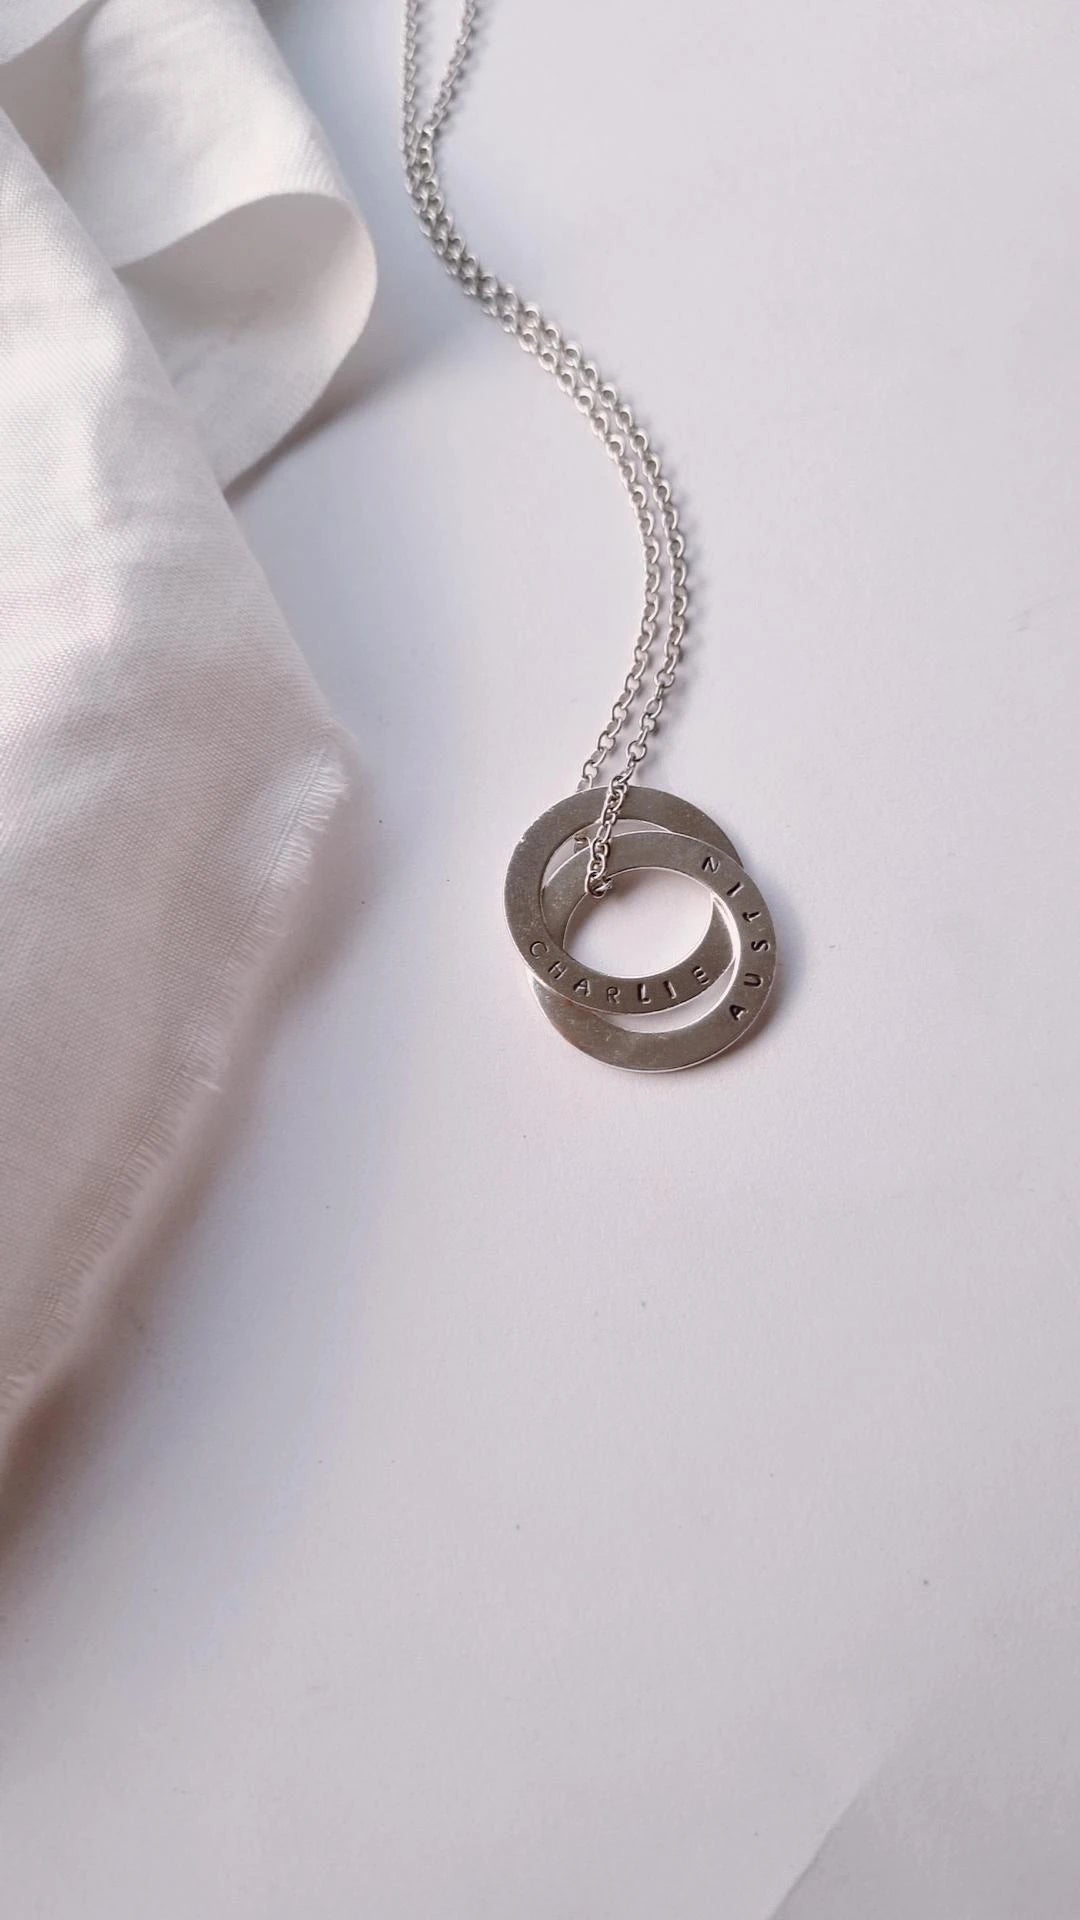 Personalised silver double washer necklace